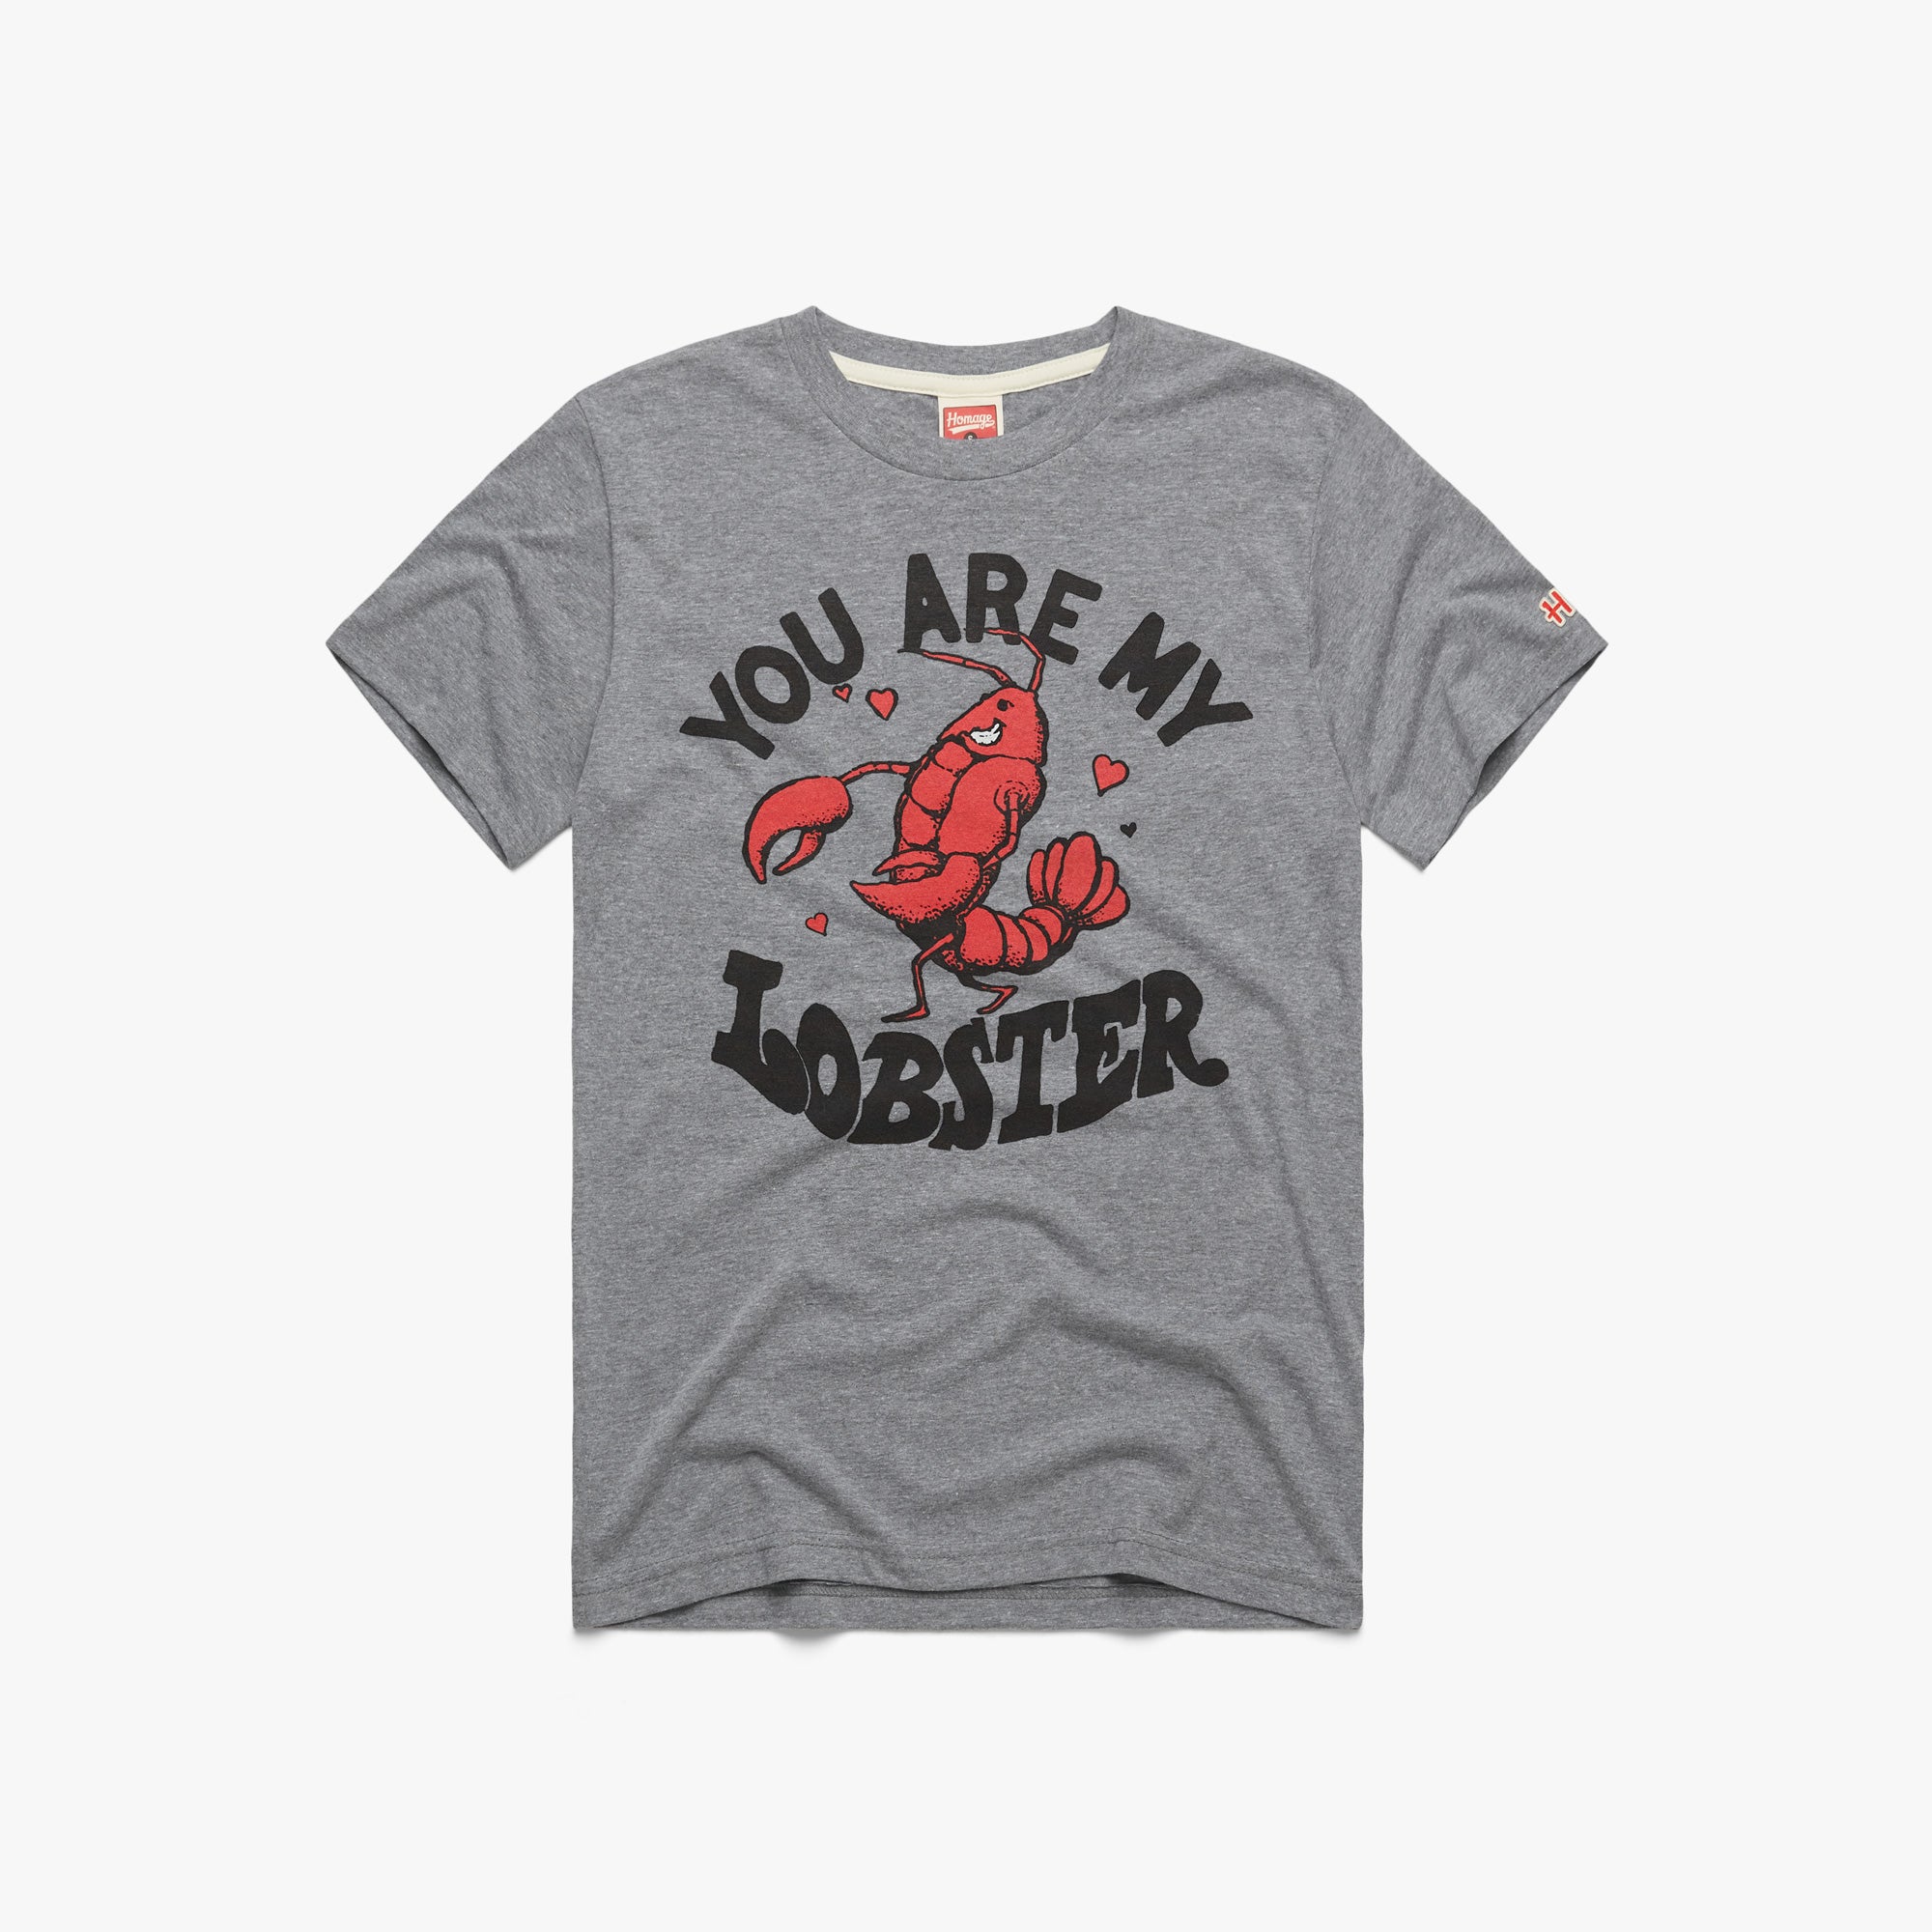 RED SOX LOBSTER T-SHIRT